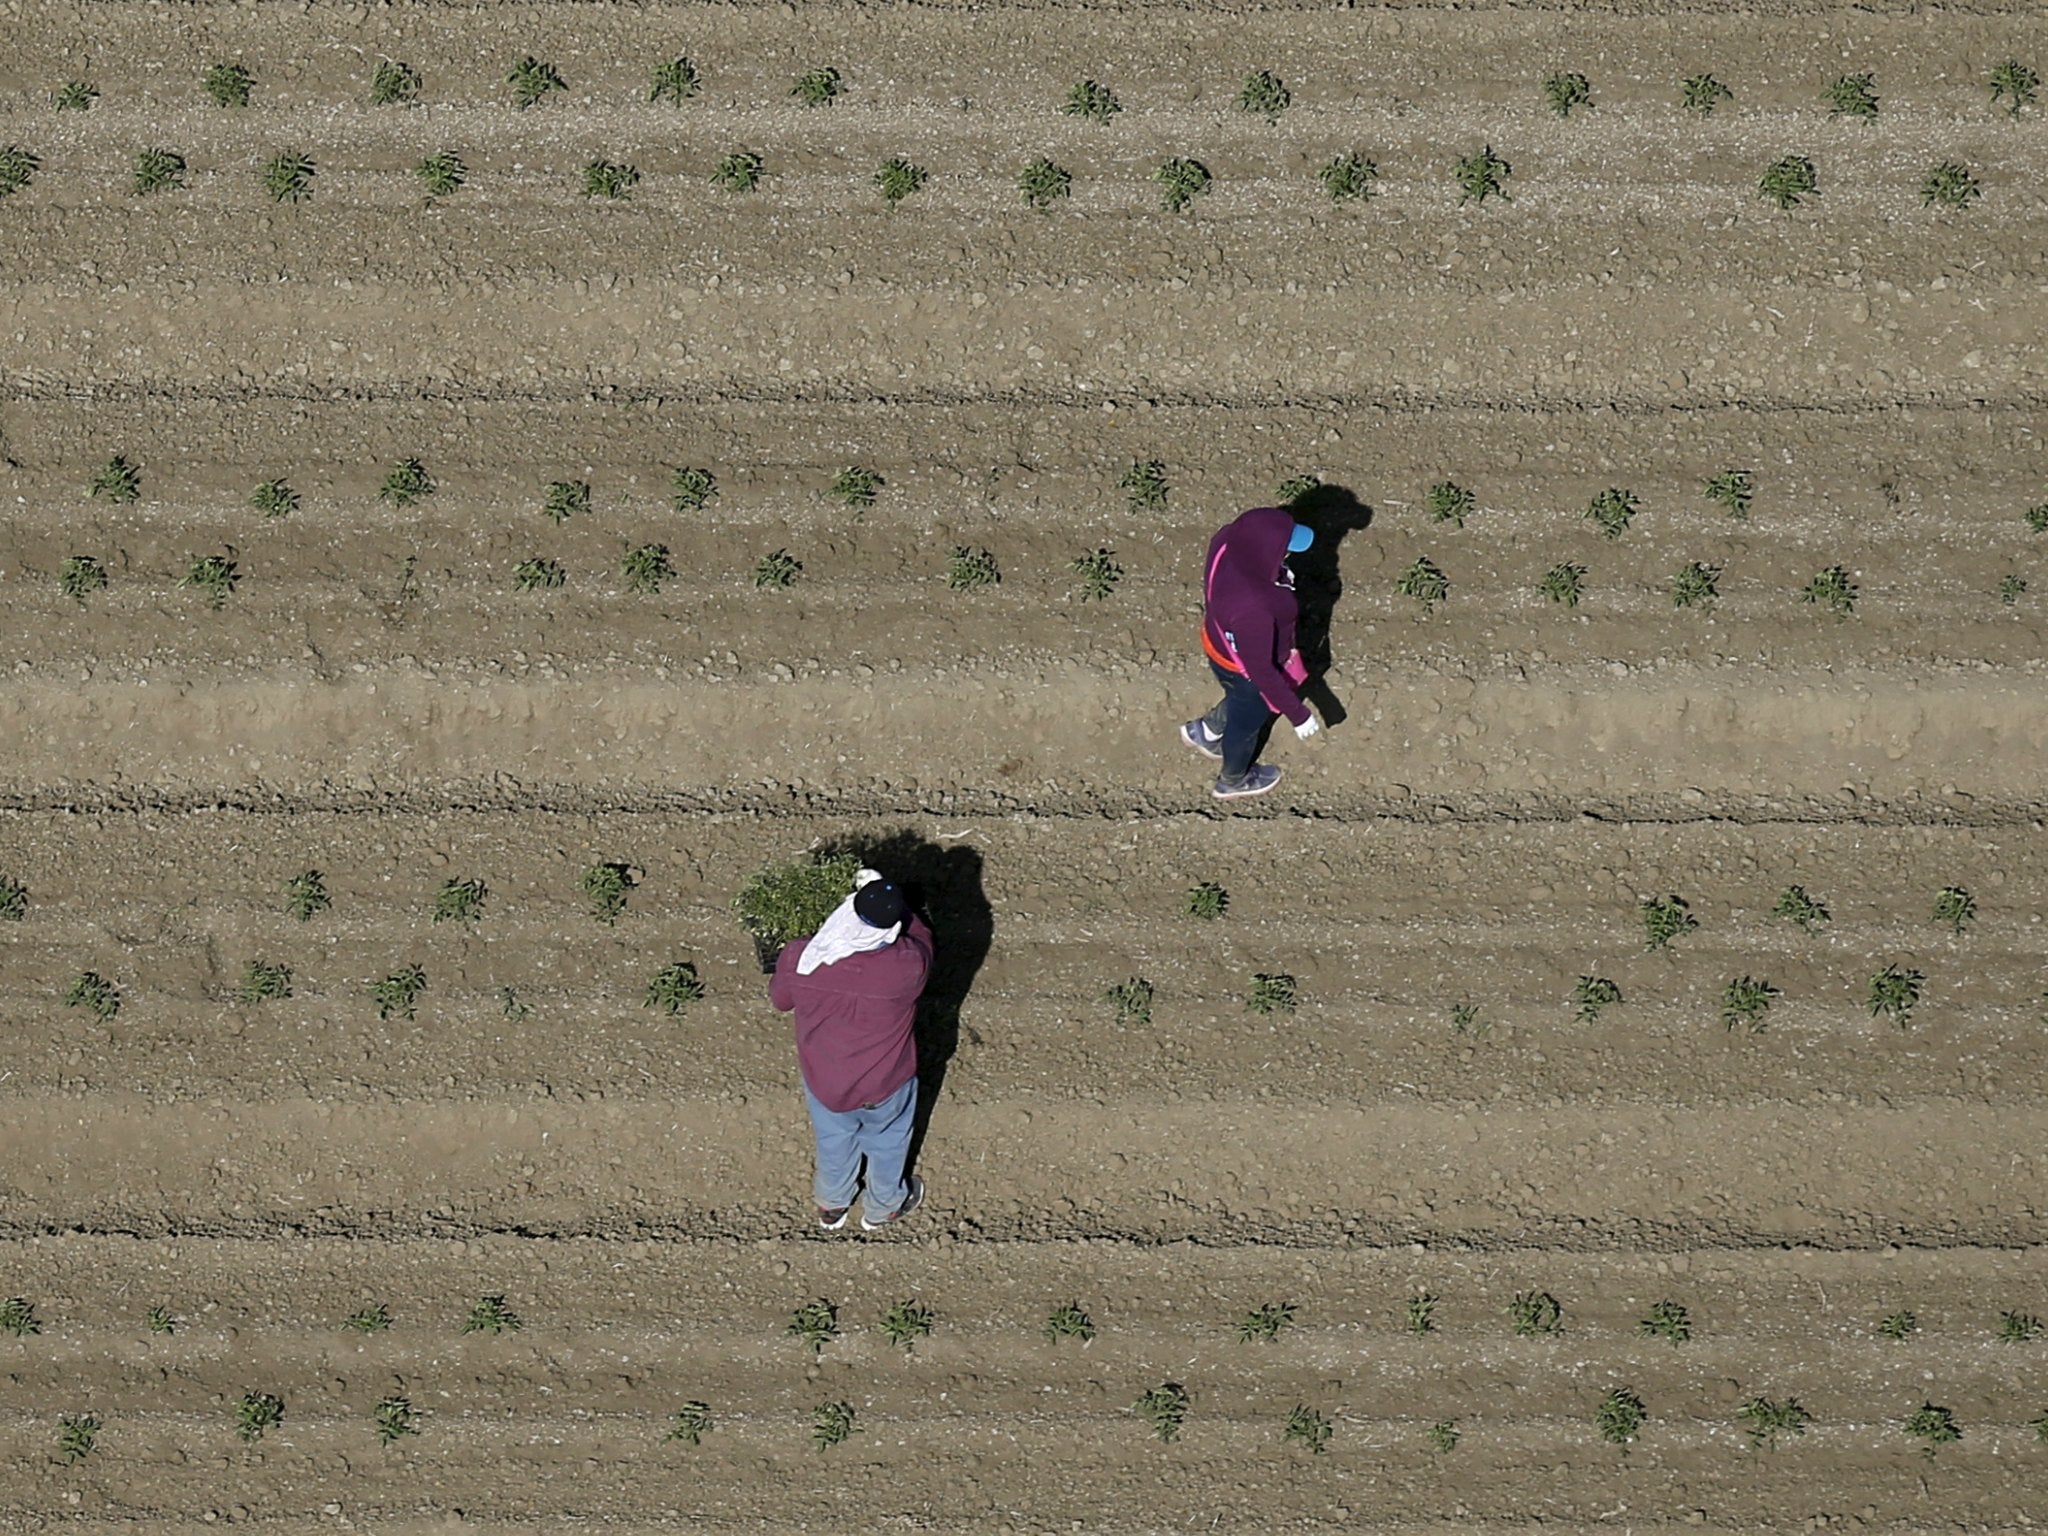 Workers plant crops near Fresno, California in May of 2015. Growers in this agriculturally abundant region have grappled for years with a labor shortage.